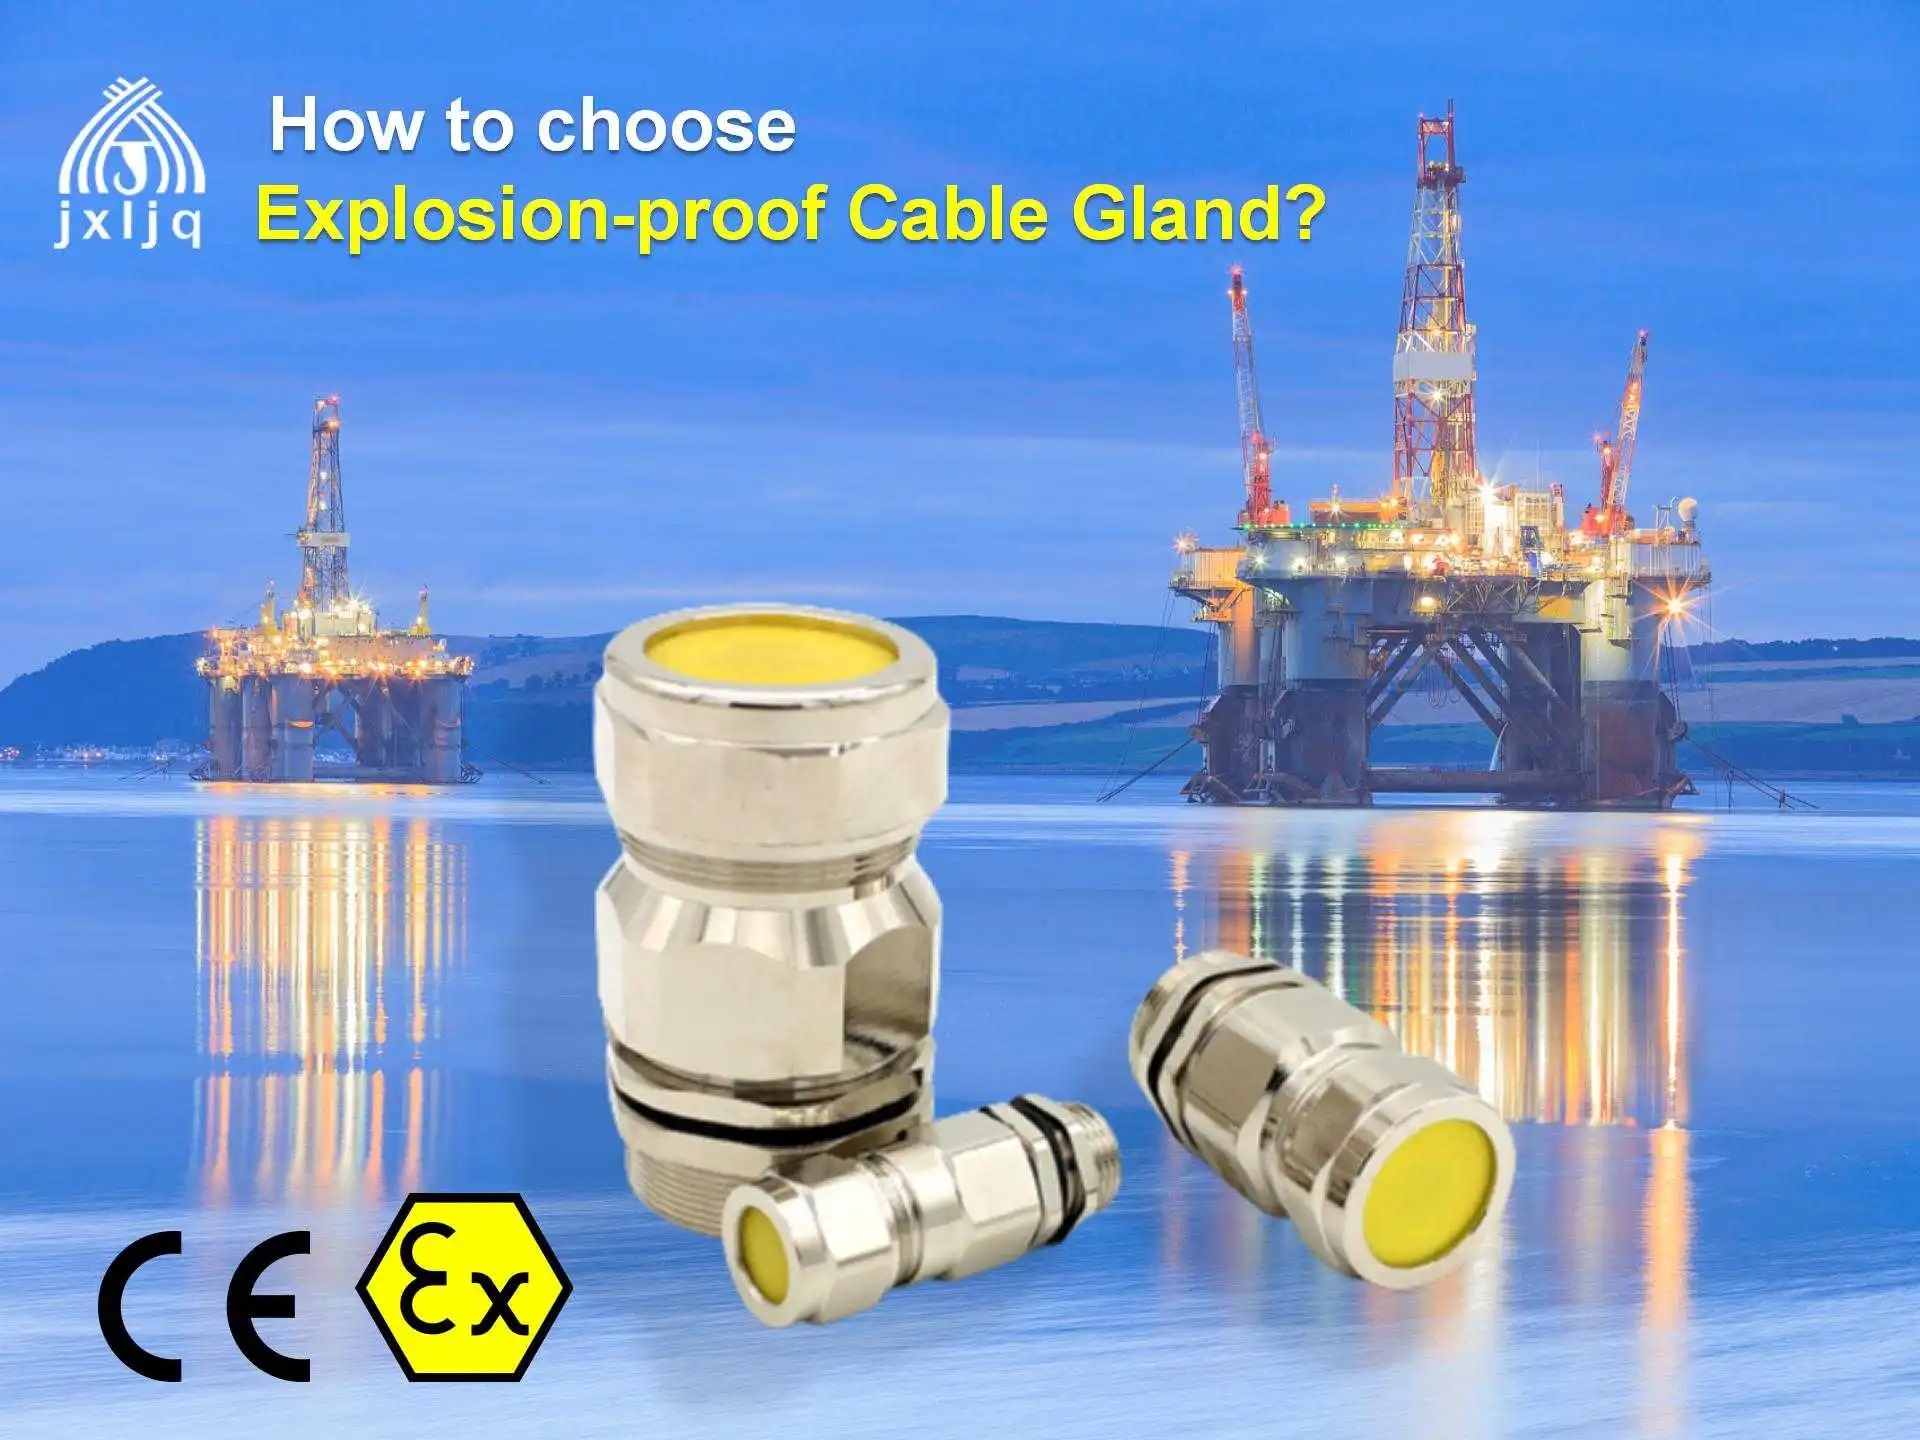 Explosion-proof Cable Gland for Hazardous Area